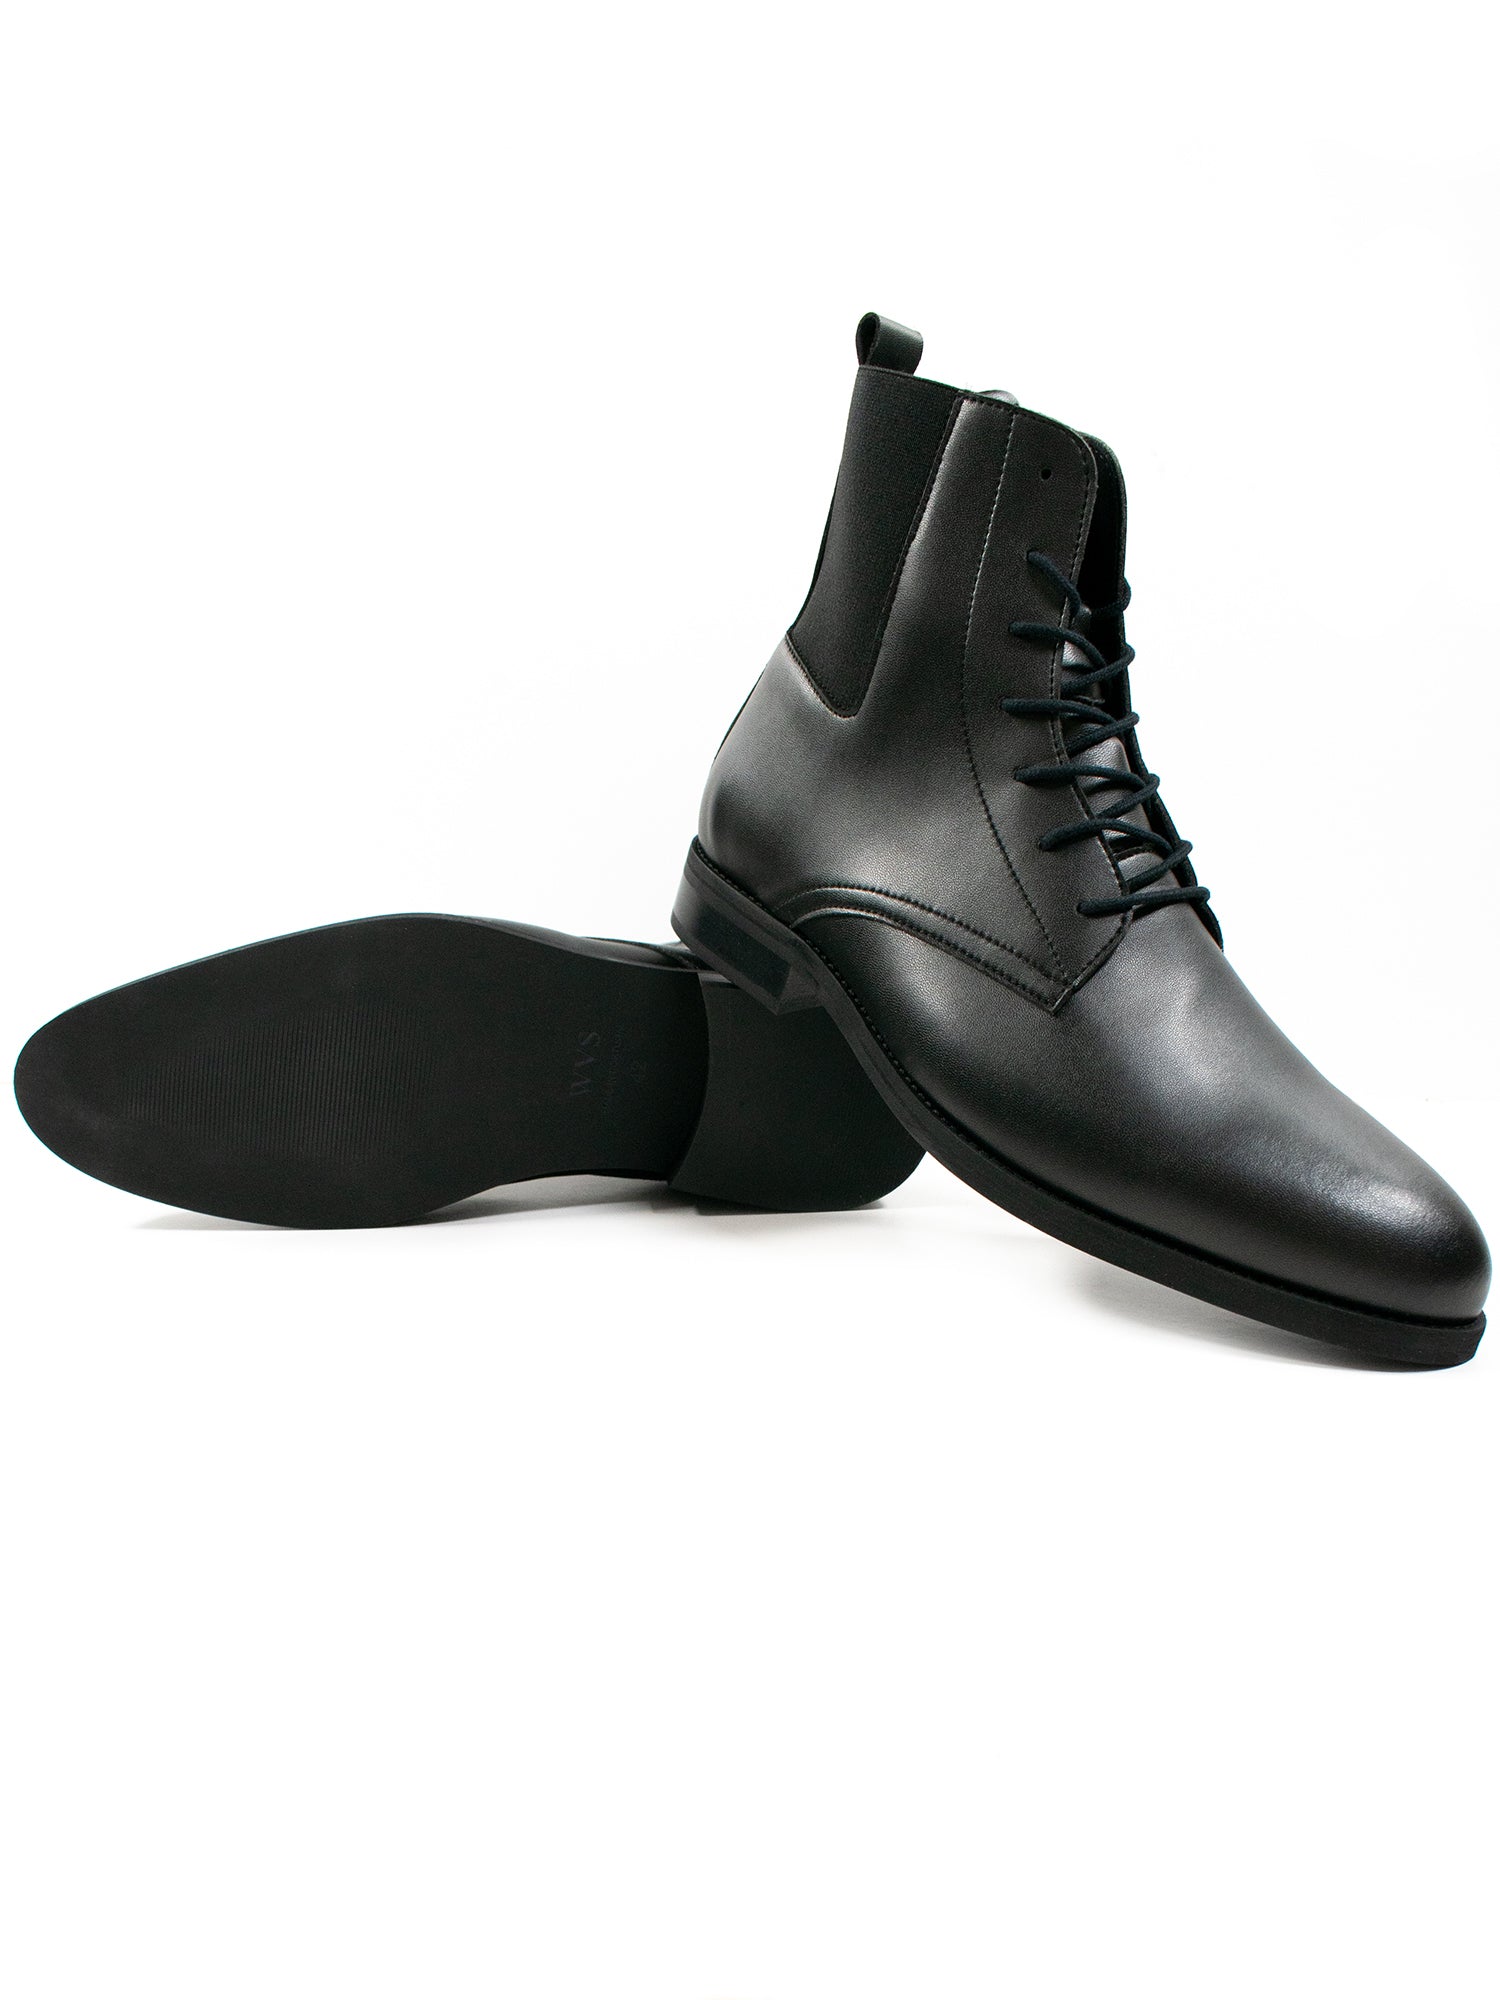 Brown Mens Casual Dress Boots | Stylish Boots for Men | Africa Blooms